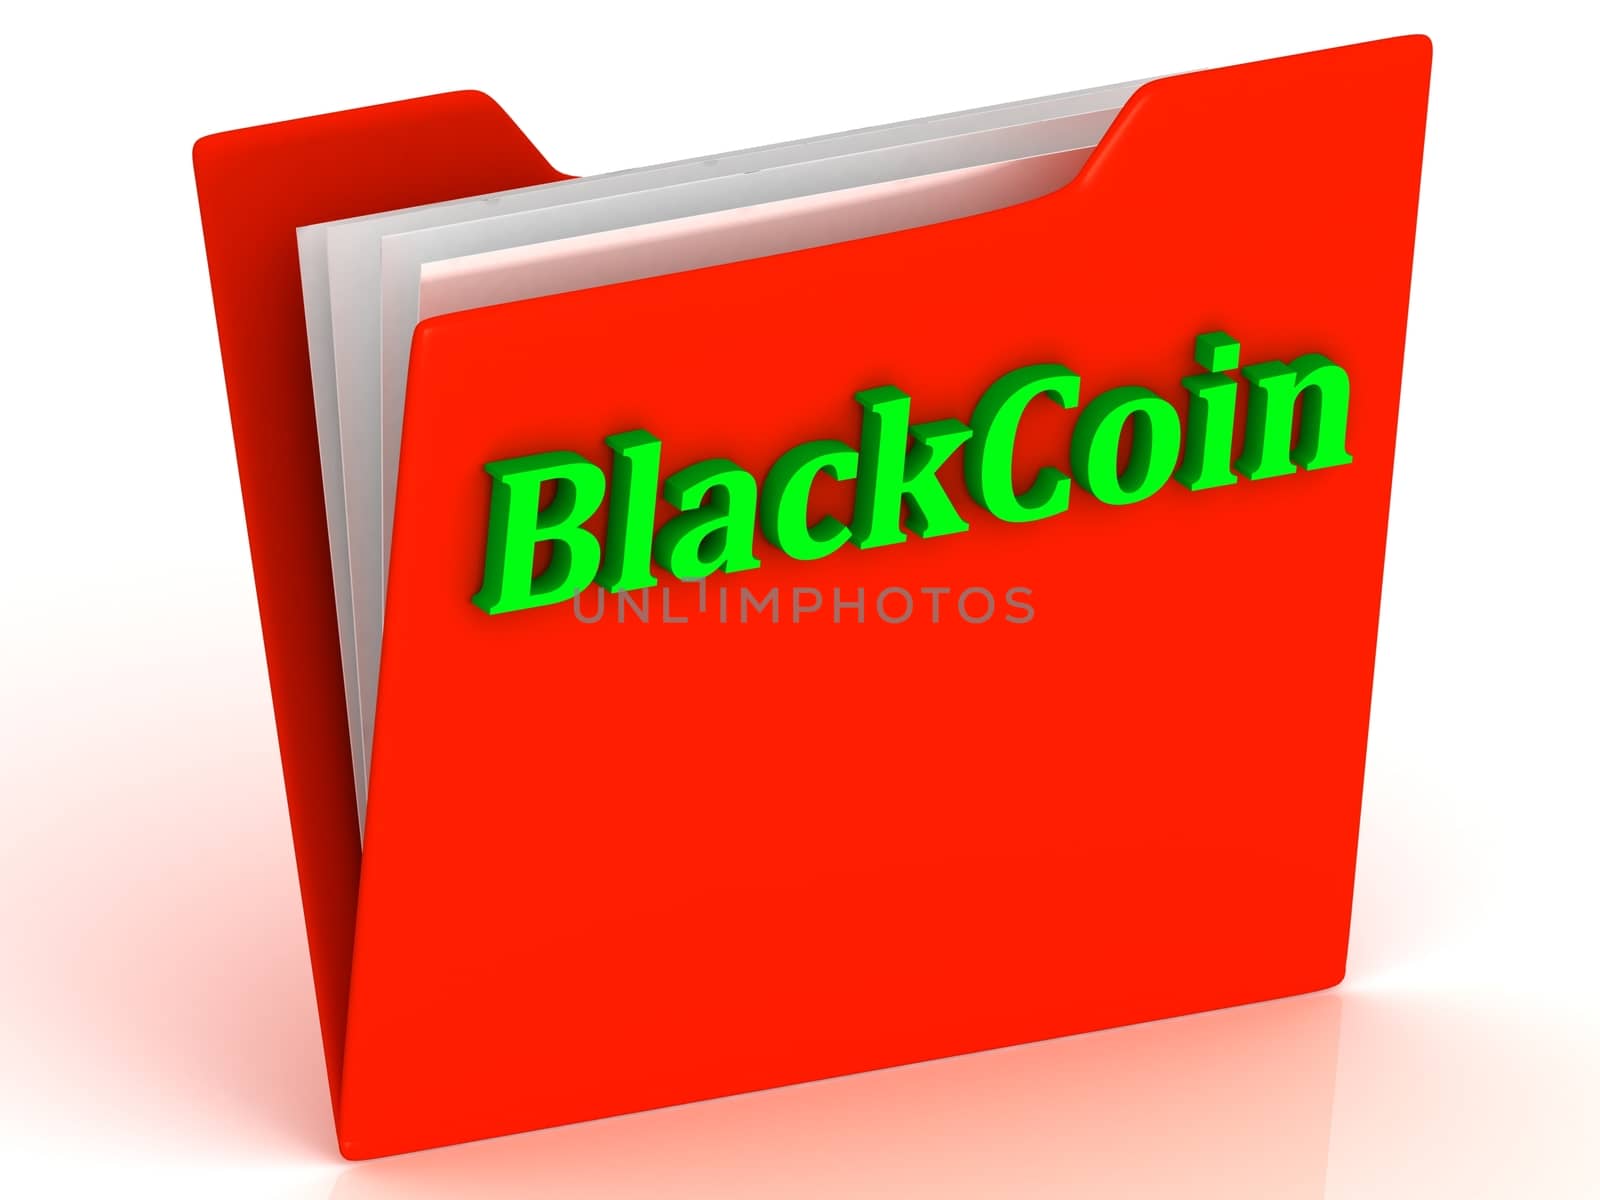 BlackCoin- bright green letters on a gold folder by GreenMost